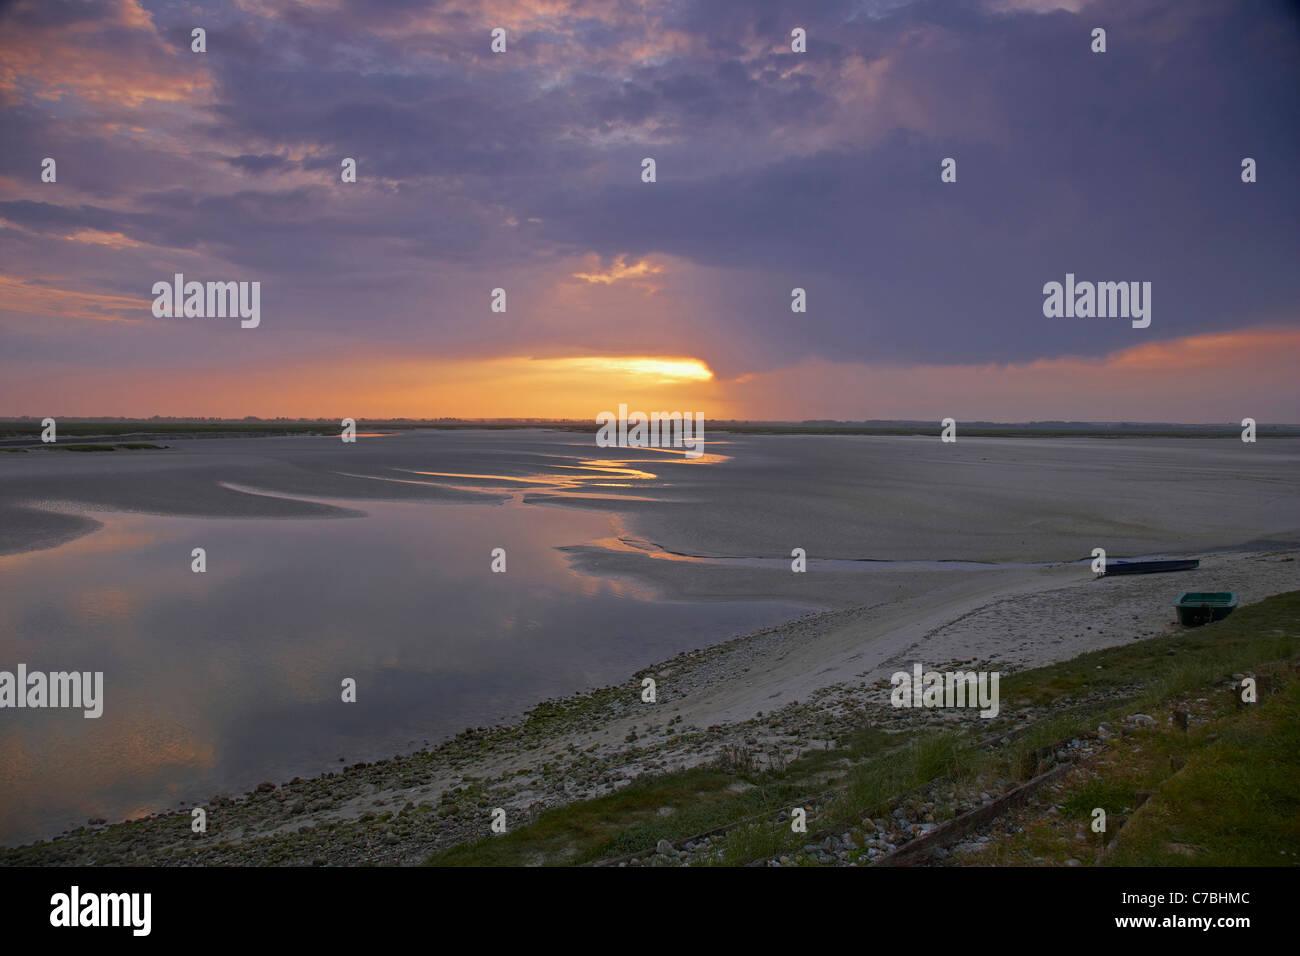 Early morning at the Baie de Somme at Saint-Valery-sur-Somme, Dept. Somme, Picardie, France, Europe Stock Photo